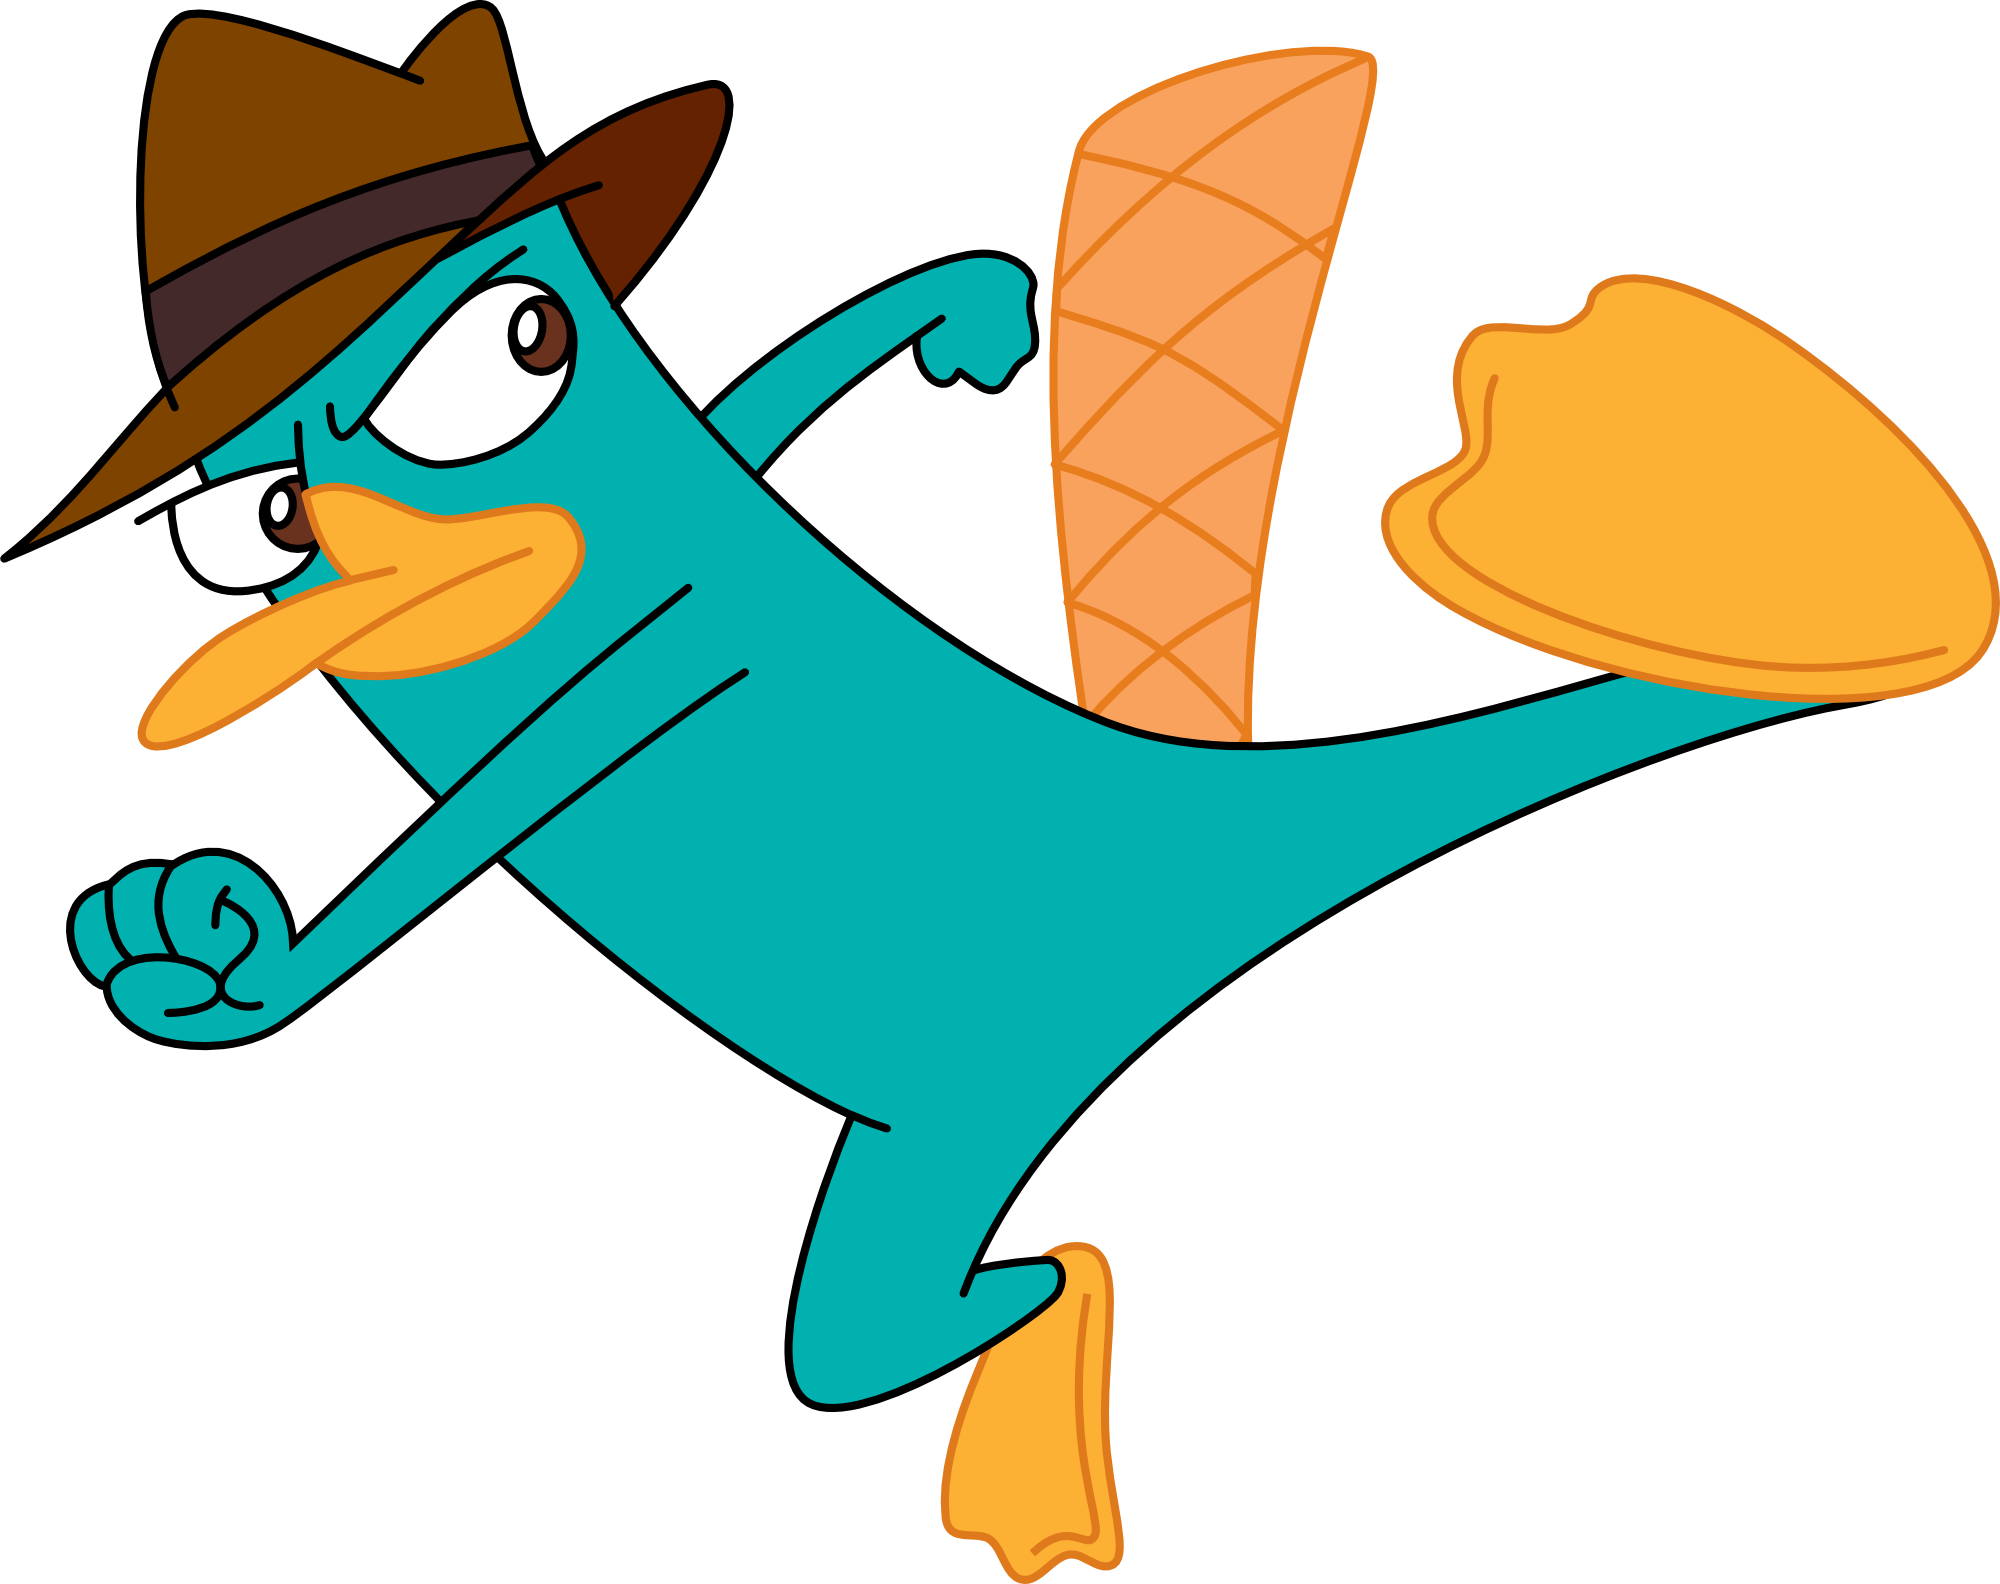 Perry_the_platypus_by_sarrel-d3gvo02.png